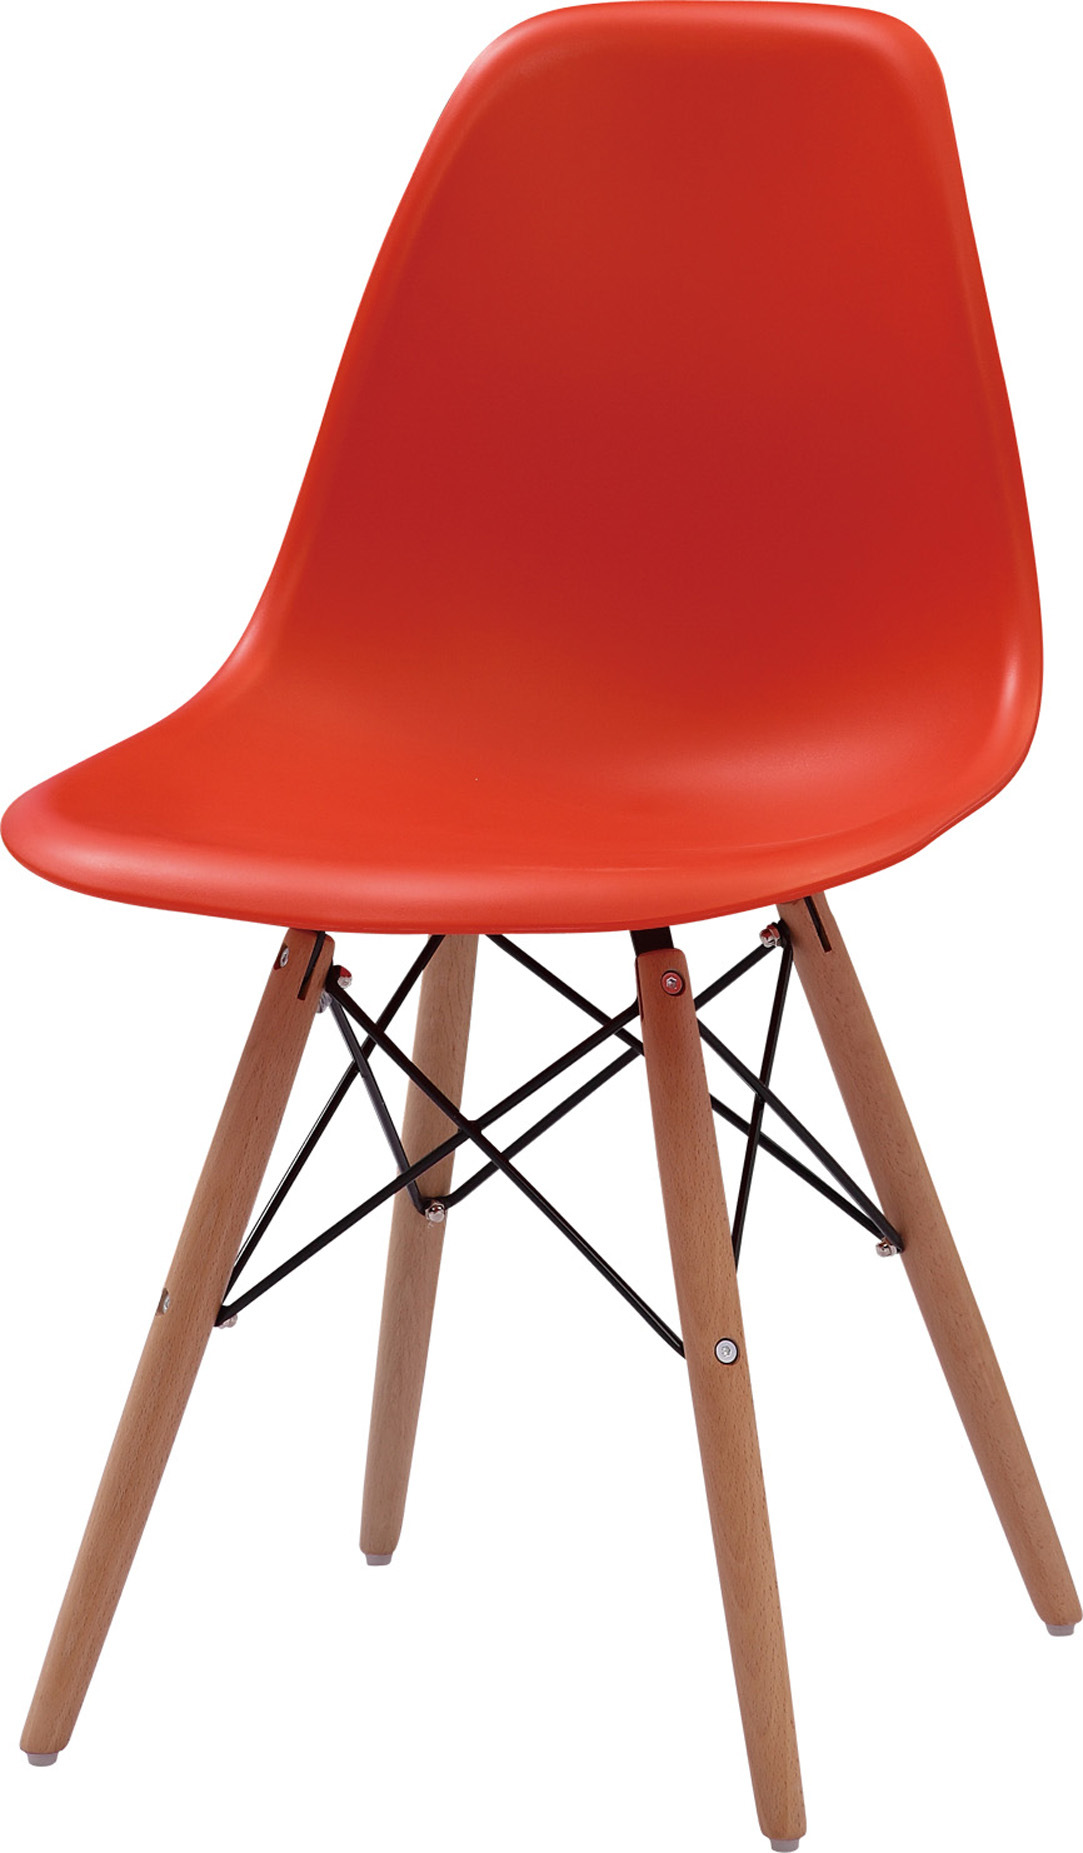 High Quality Designer Red Plastic Chair for Sale Foh-Bcc07